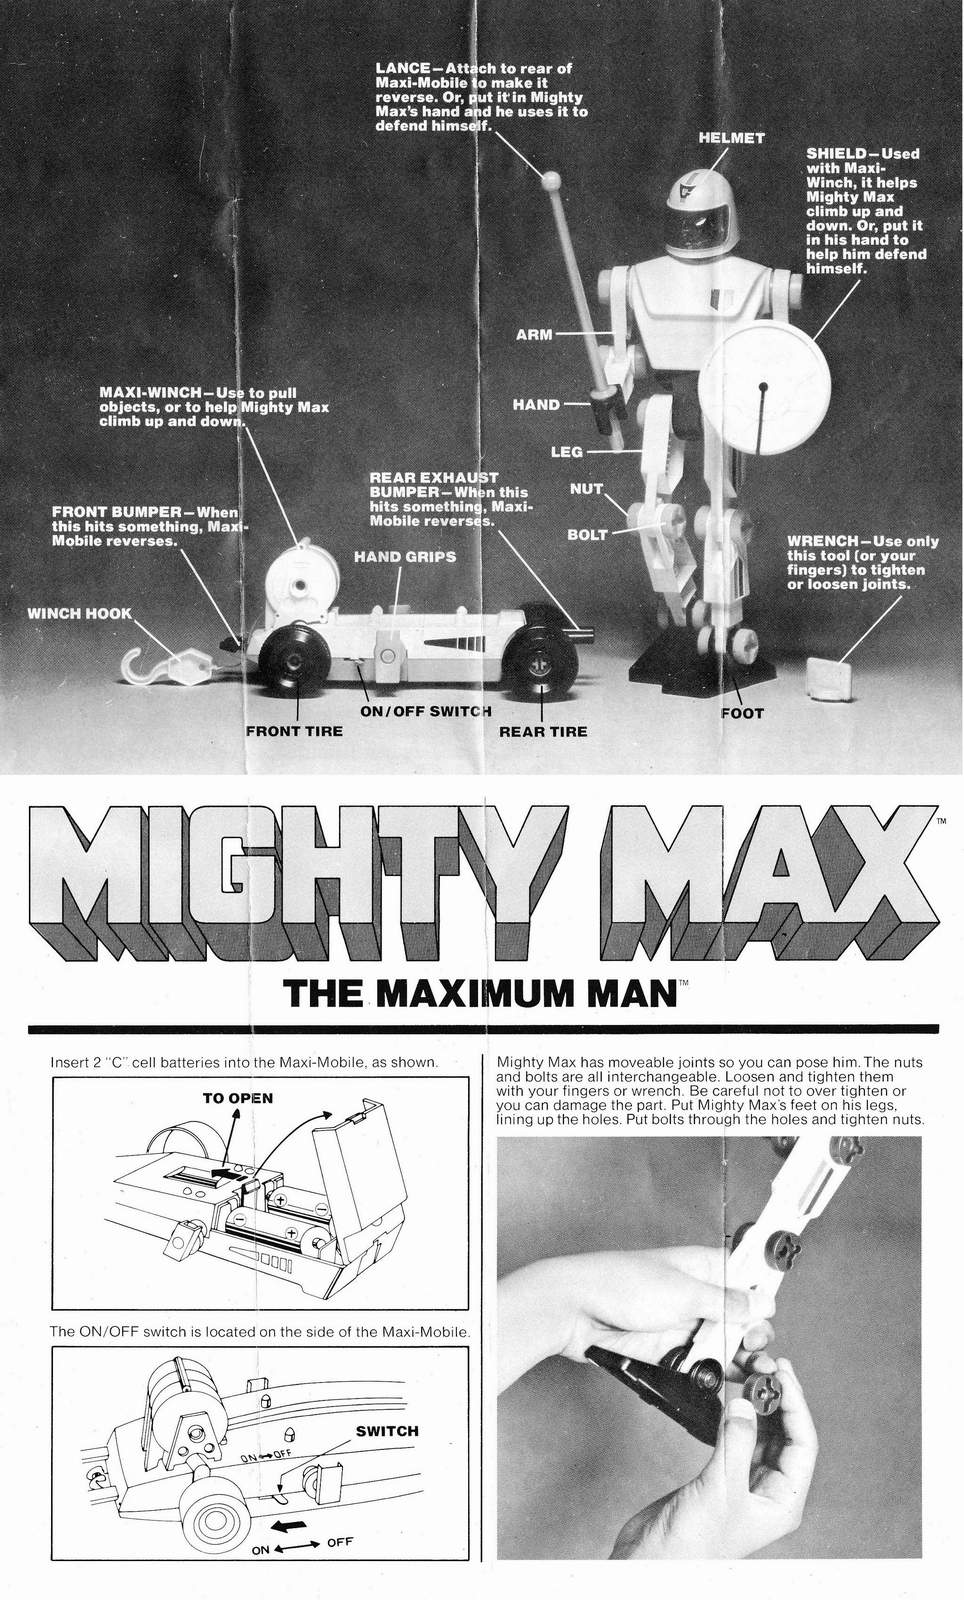 Mighty Max Robot